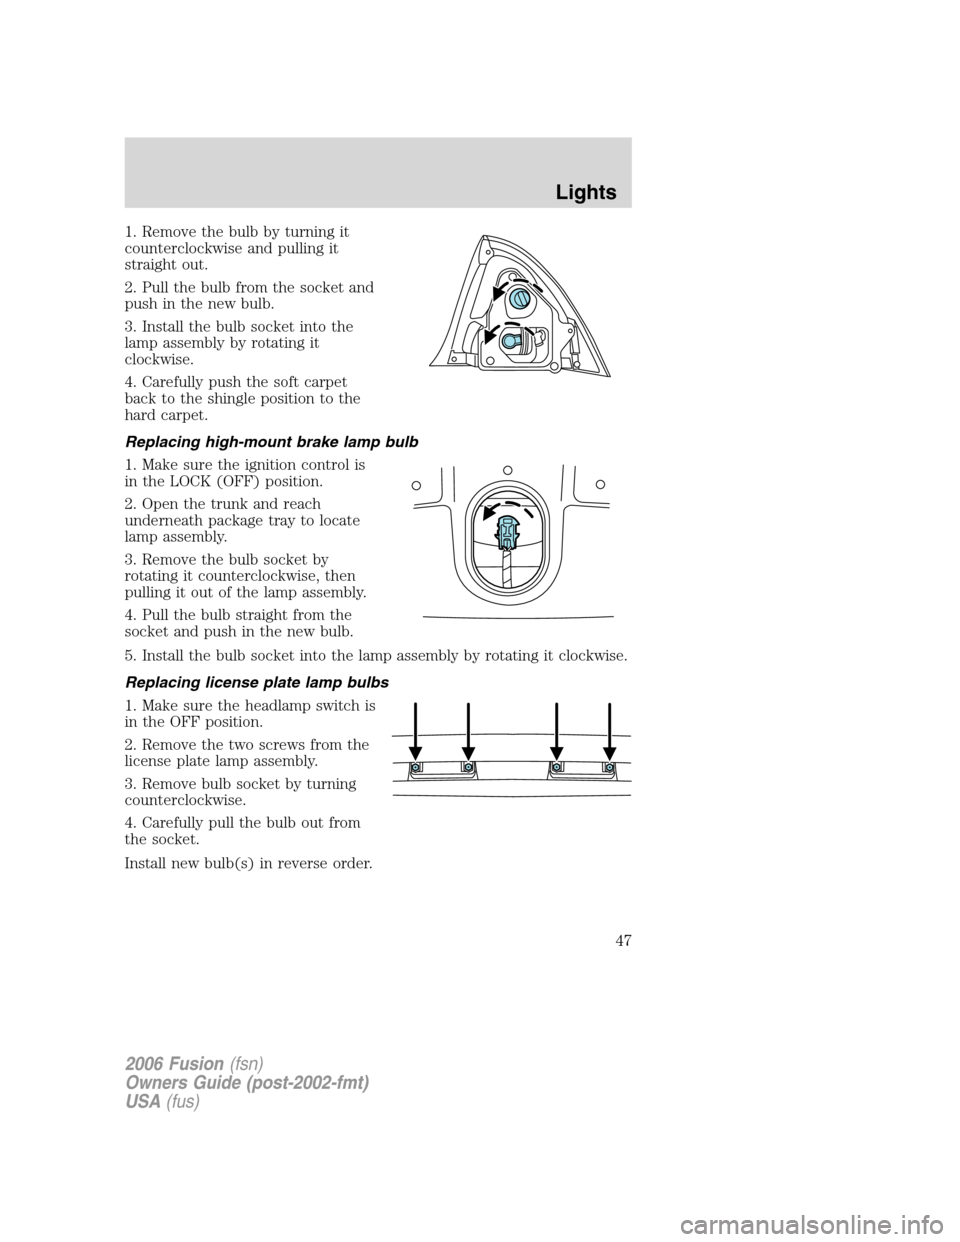 FORD FUSION (AMERICAS) 2006 1.G Service Manual 1. Remove the bulb by turning it
counterclockwise and pulling it
straight out.
2. Pull the bulb from the socket and
push in the new bulb.
3. Install the bulb socket into the
lamp assembly by rotating 